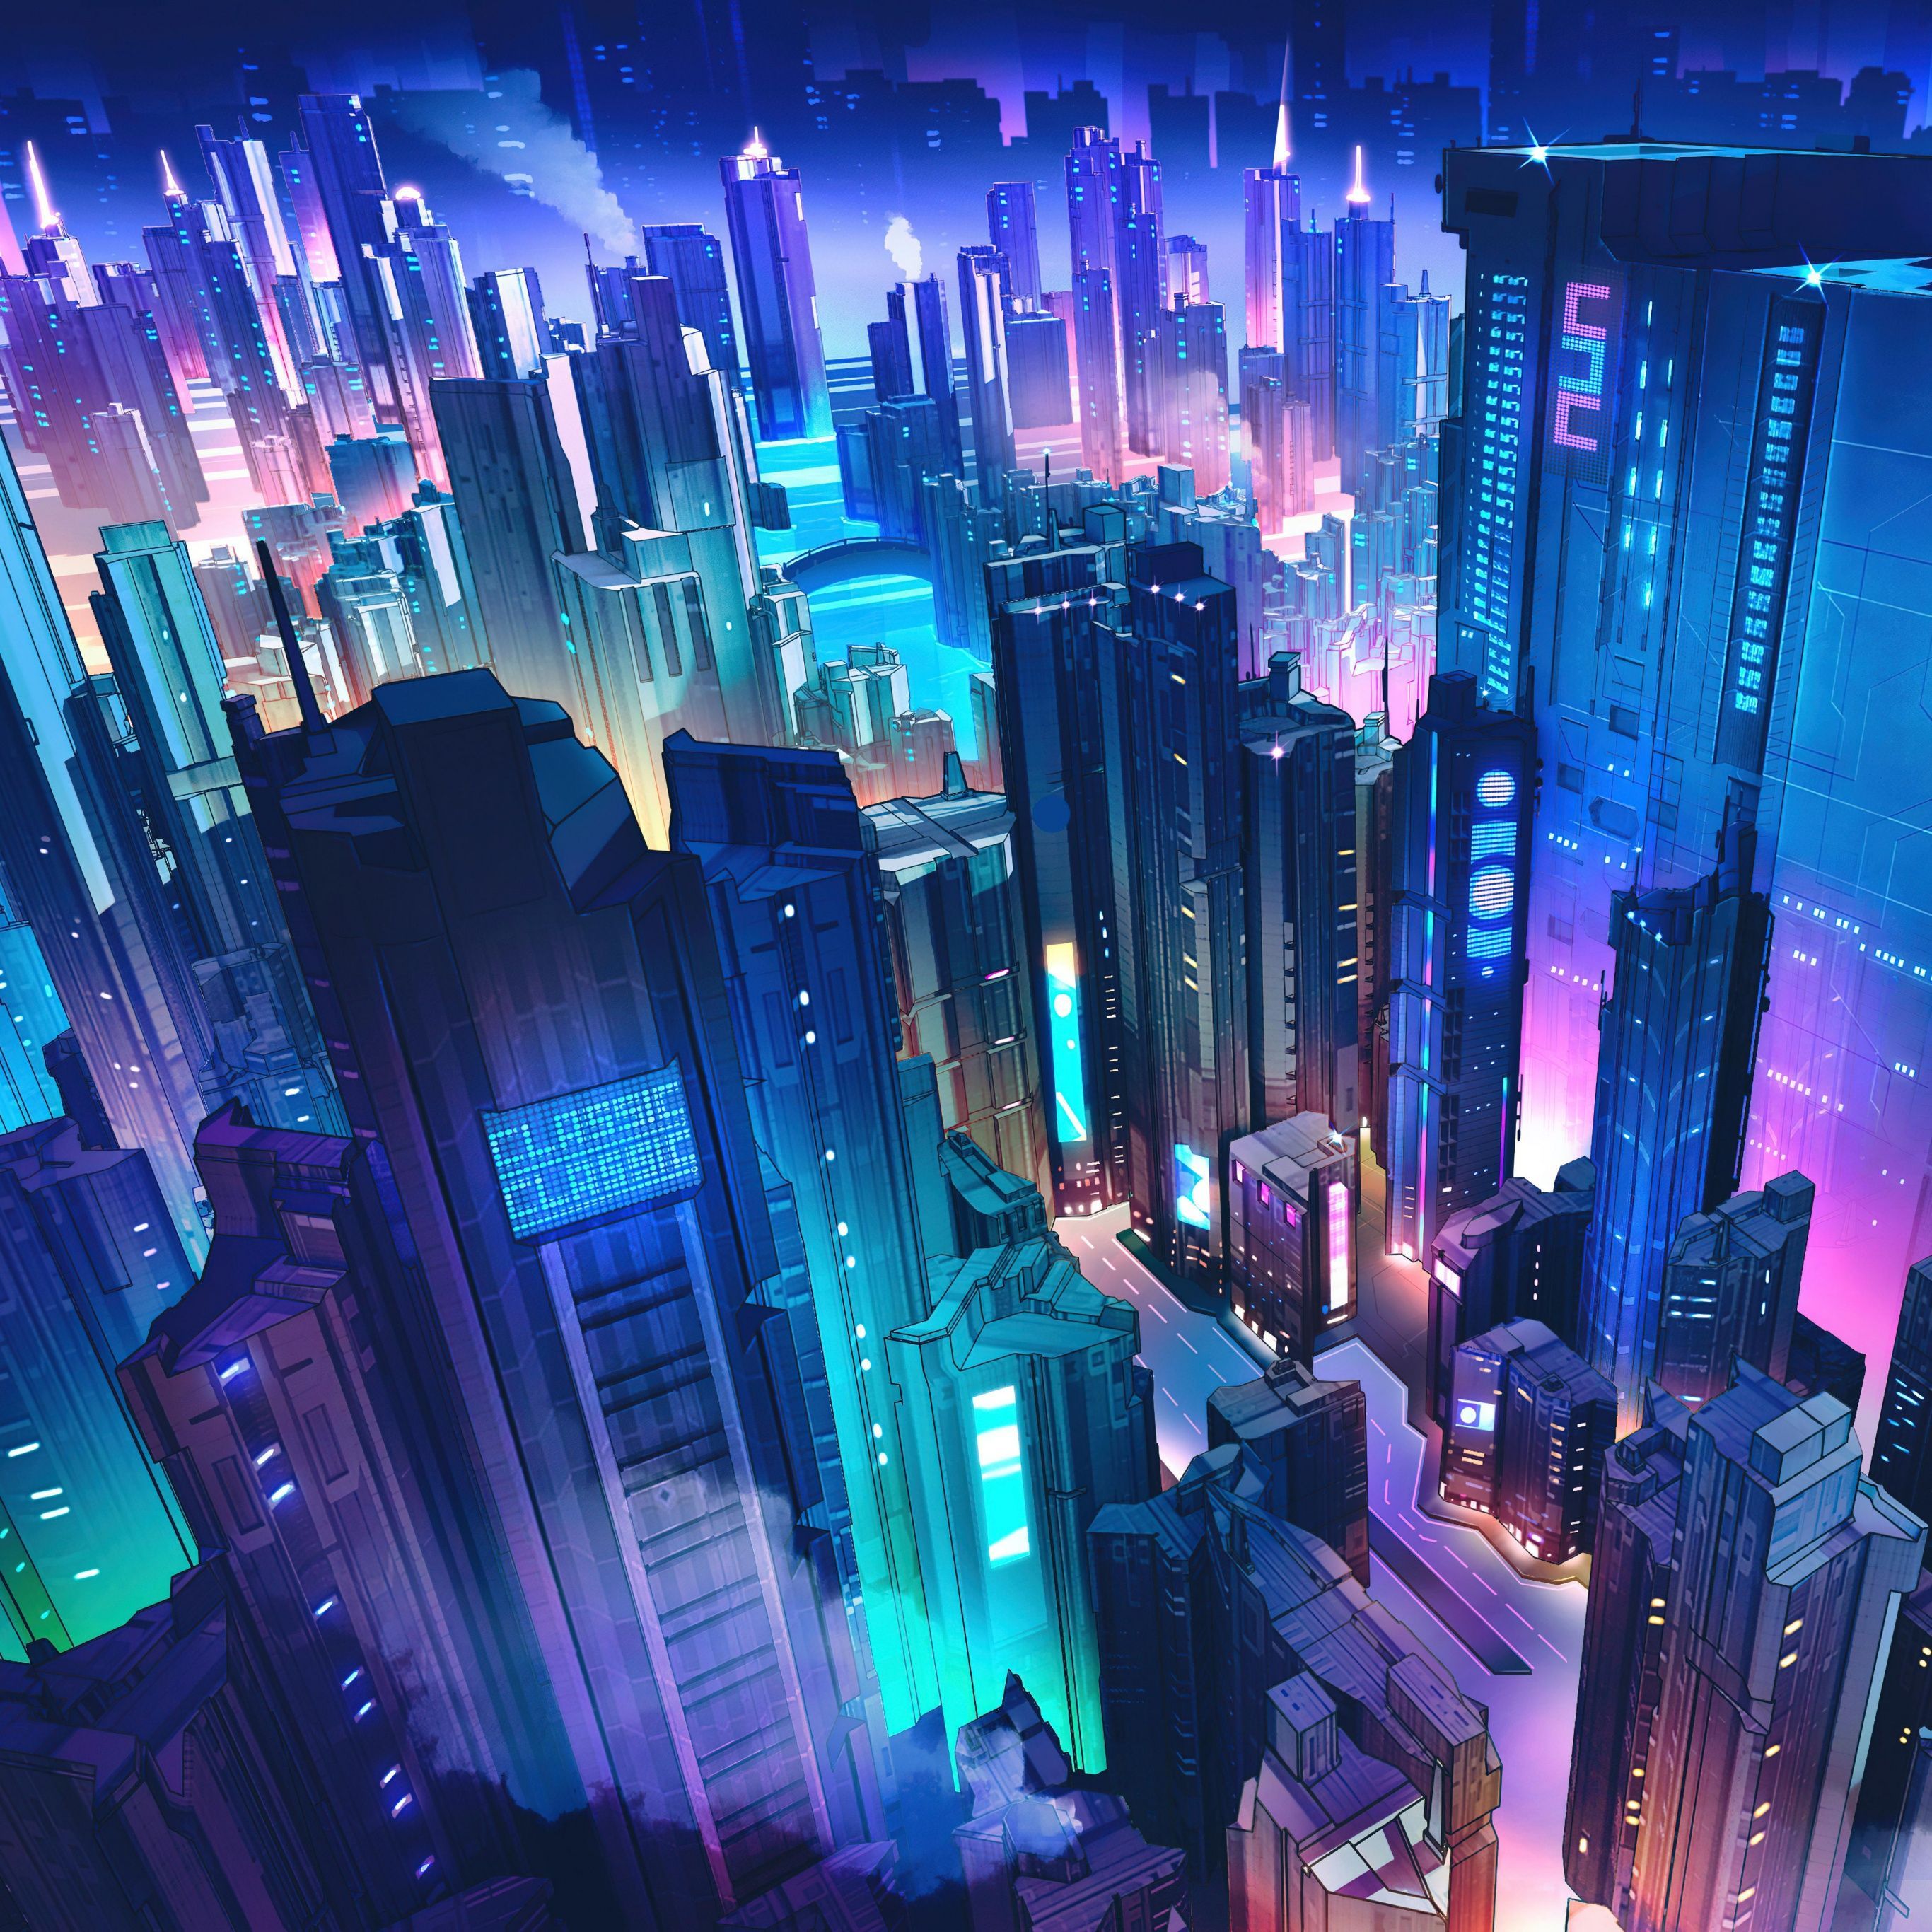 An illustration of a futuristic city with neon lights - Cyberpunk